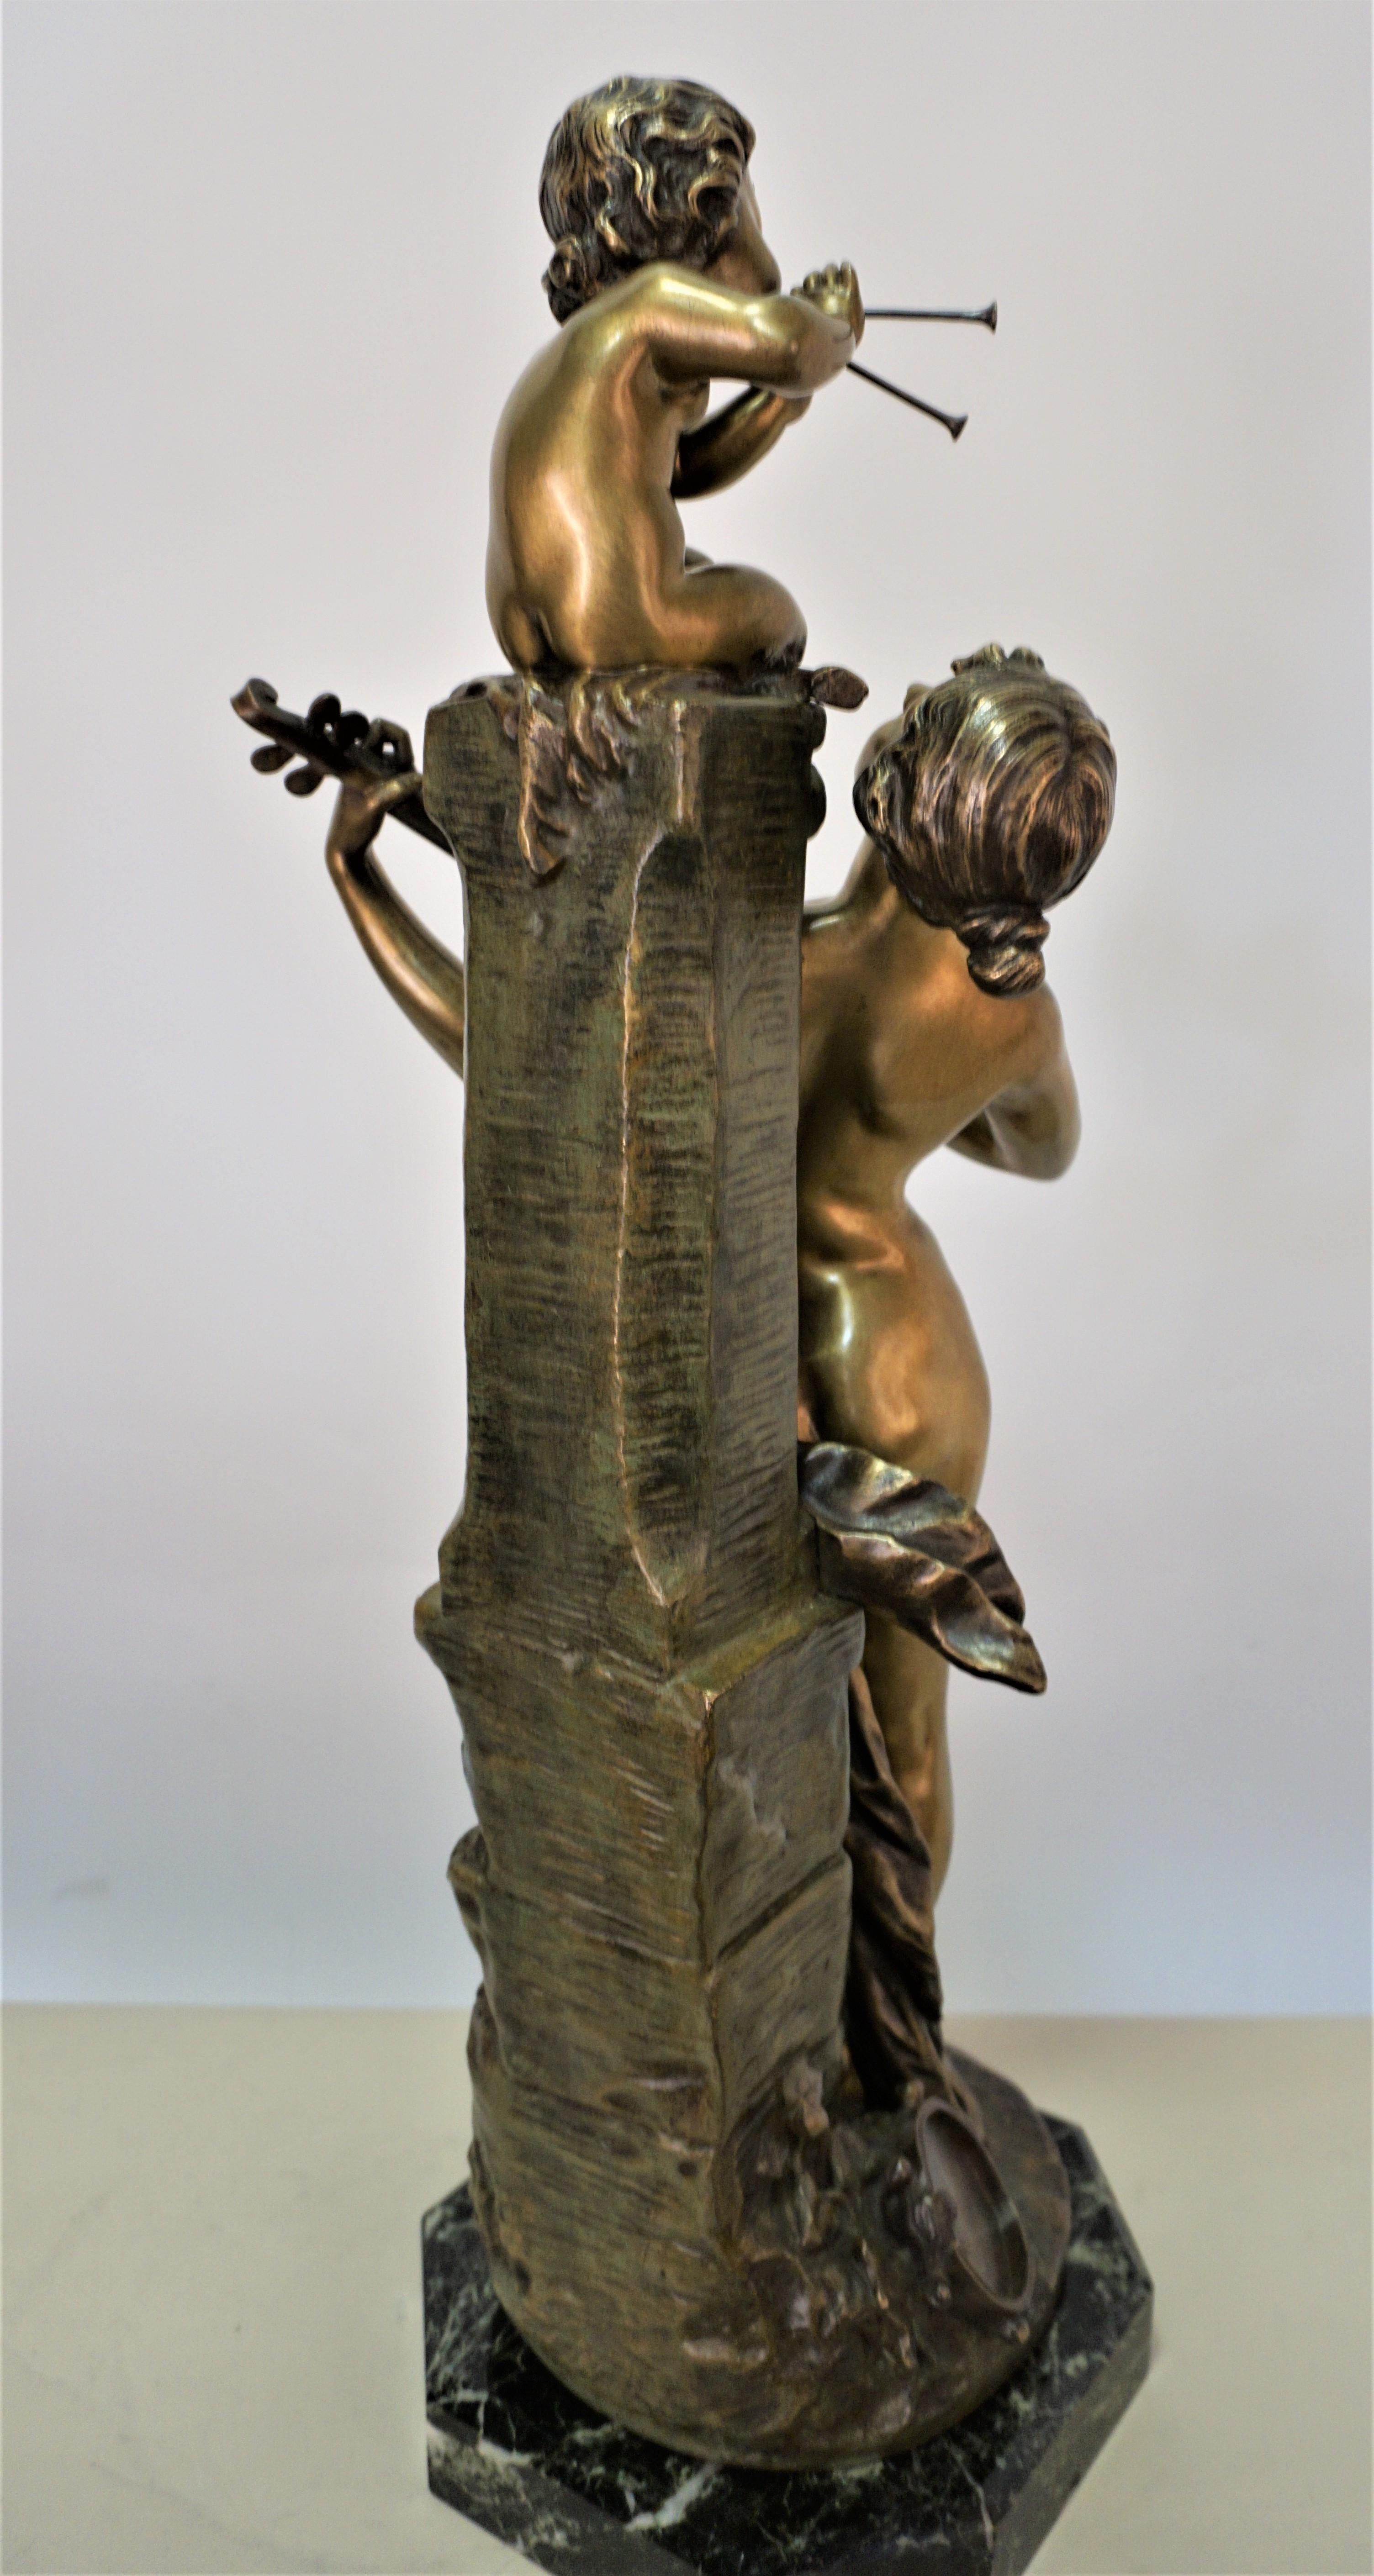 Bronze Bacchante Plying Music with Young Satyr by Aristide De Ranieri 1865-1929 For Sale 1